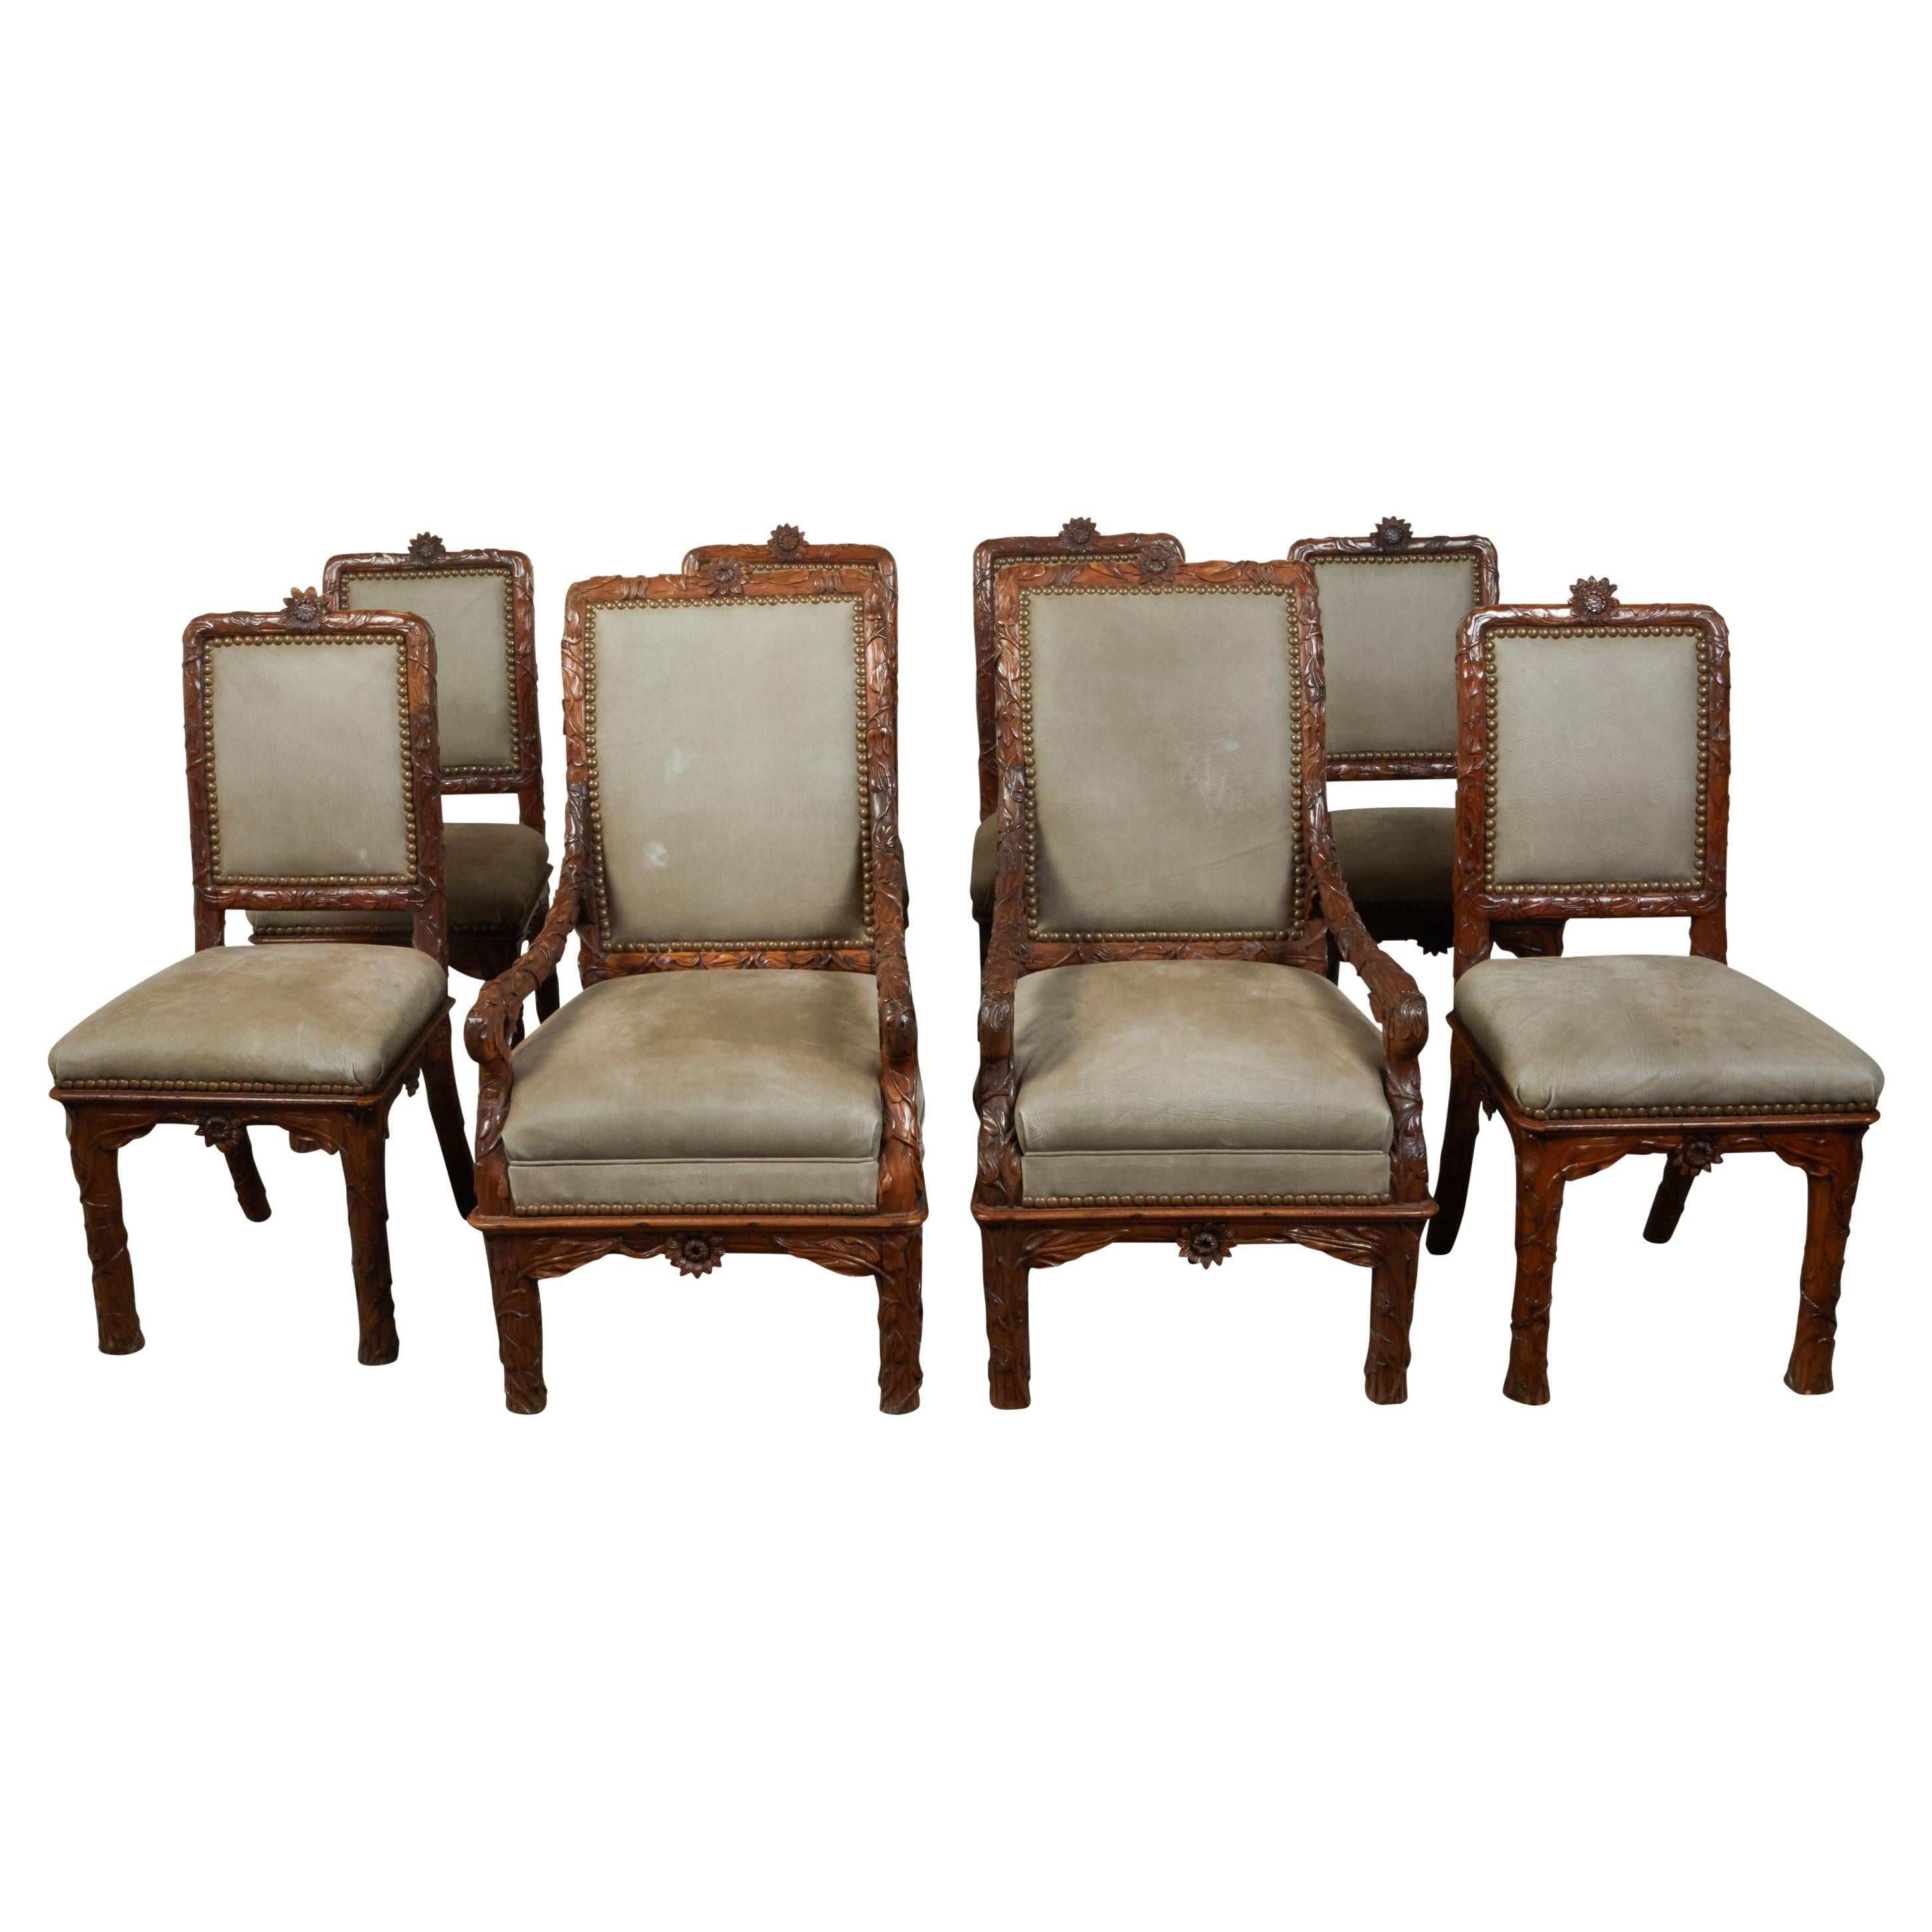 Set of Eight 1920s Black Forest Dining Room Chairs with Hand-Carved Floral Décor For Sale